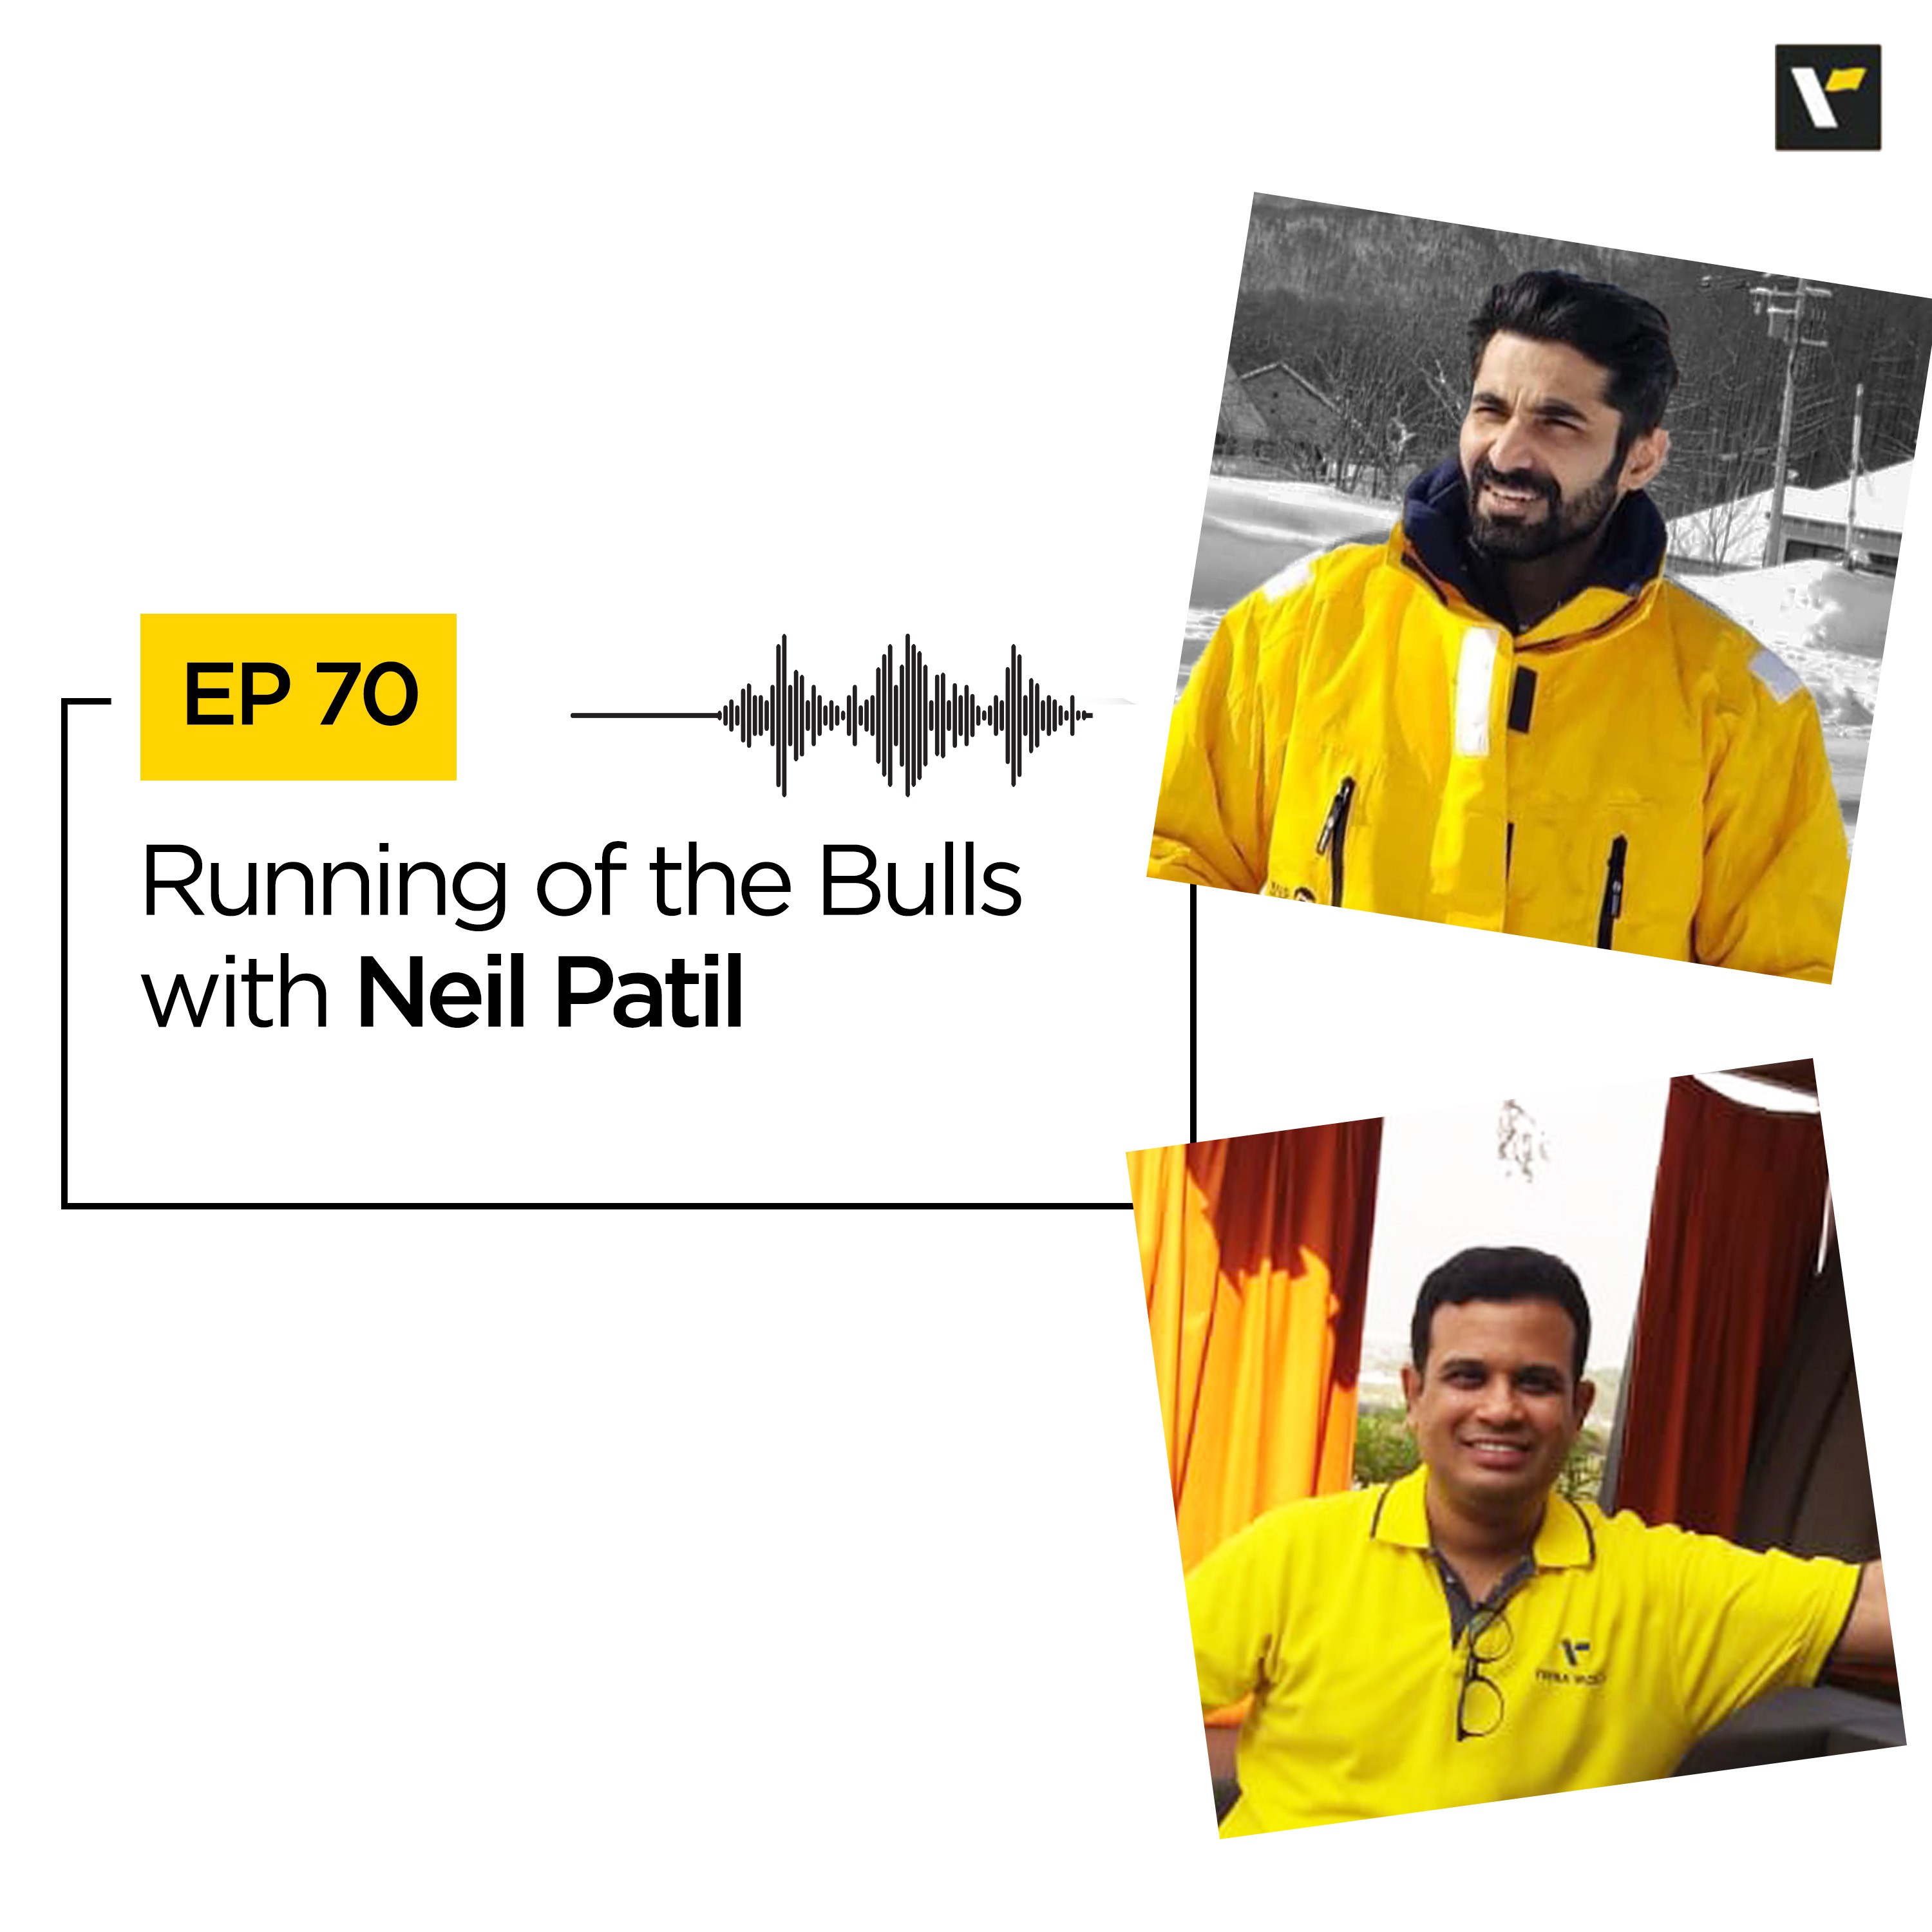 Ep 70 Running of the Bulls with Neil Patil | Veena World